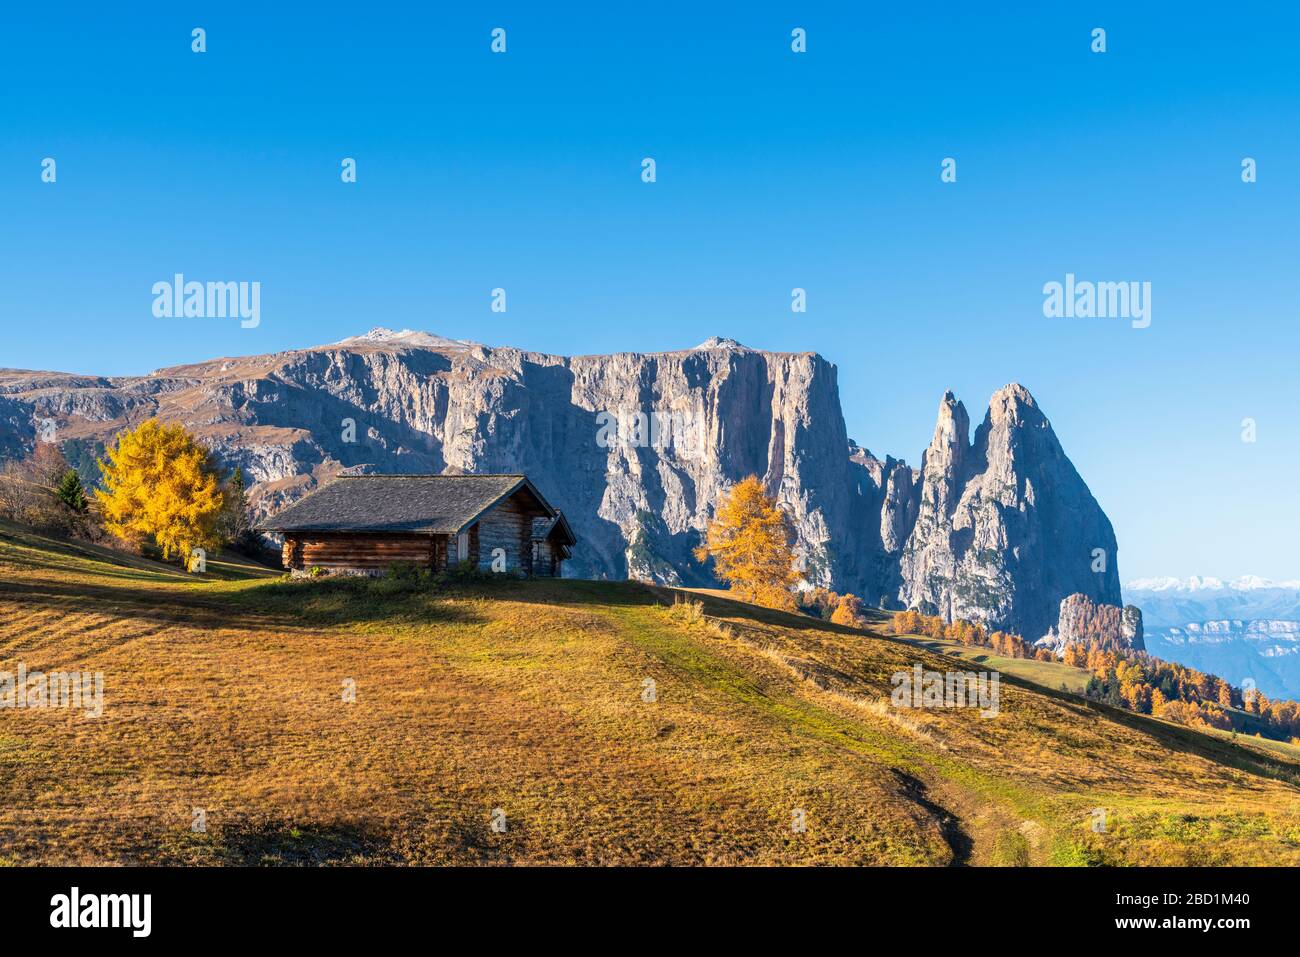 Traditional huts at Alpe di Siusi (Seiser Alm) in autumn with Sciliar peaks in background, Dolomites, South Tyrol, Italy, Europe Stock Photo